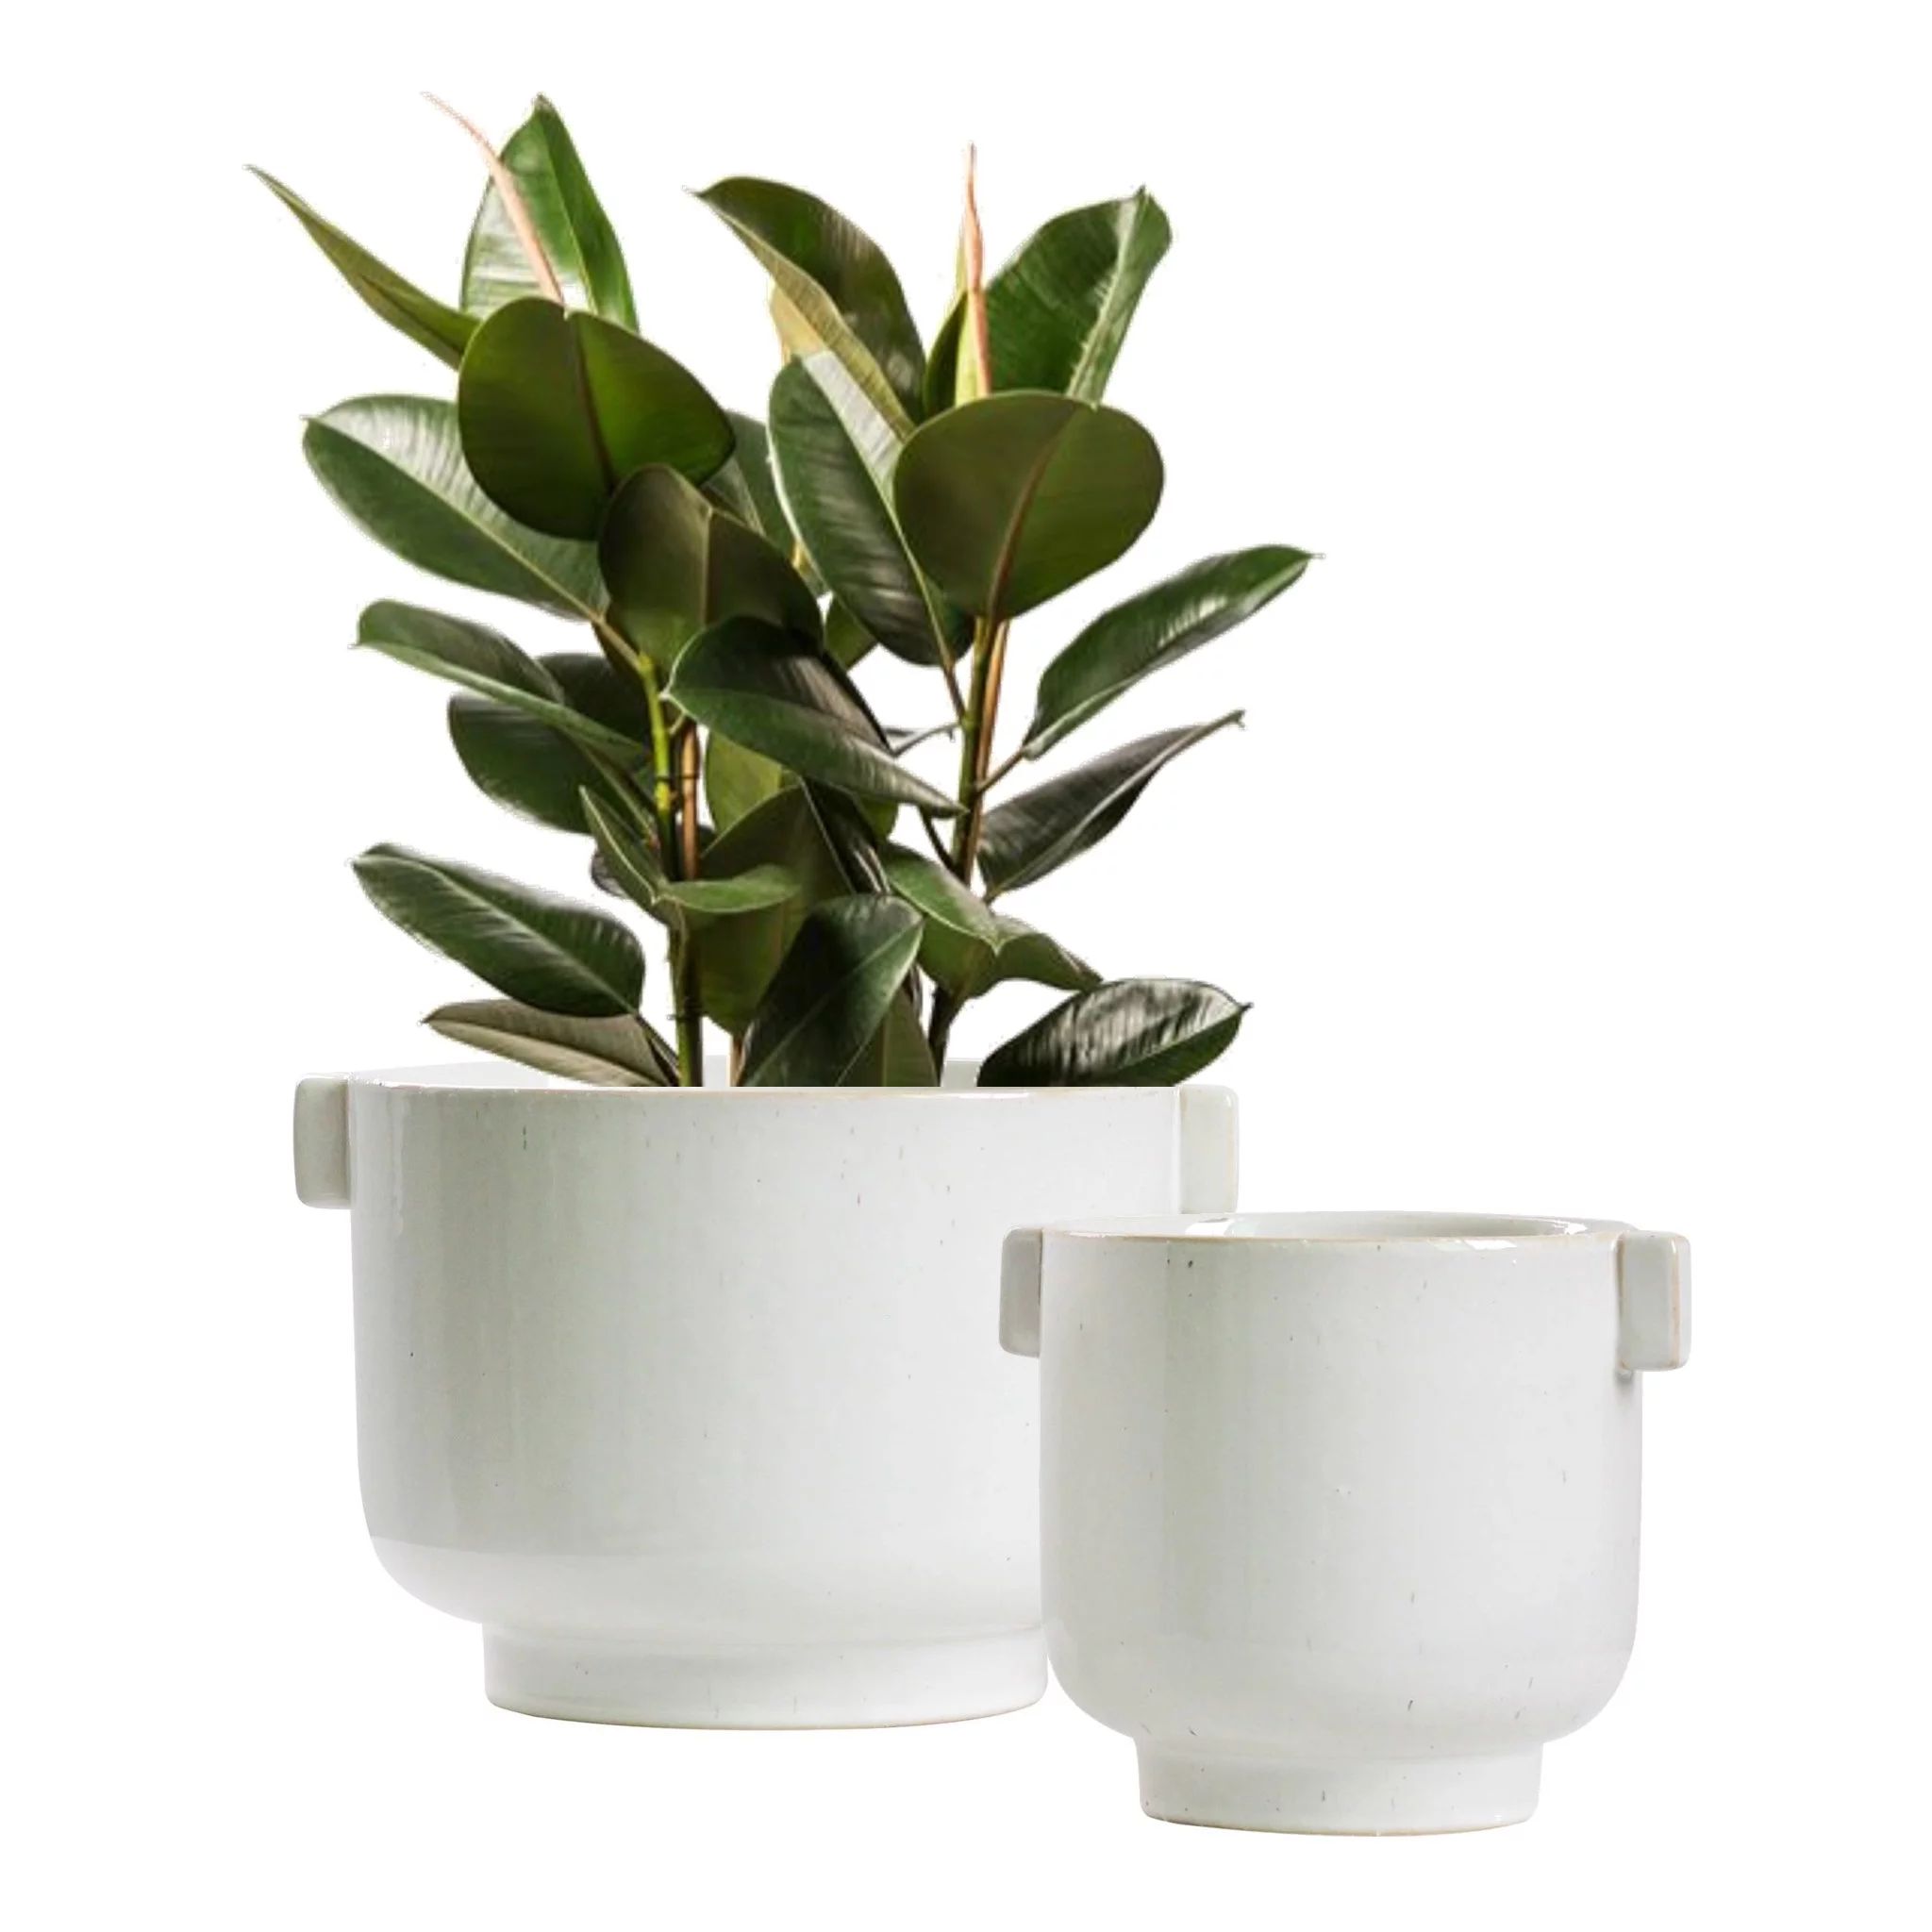 Olly & RoseCotswolds Ceramic Plant Pot Set with Handles - Indoor & Outdoor Planters - Aged White ... | Walmart (US)